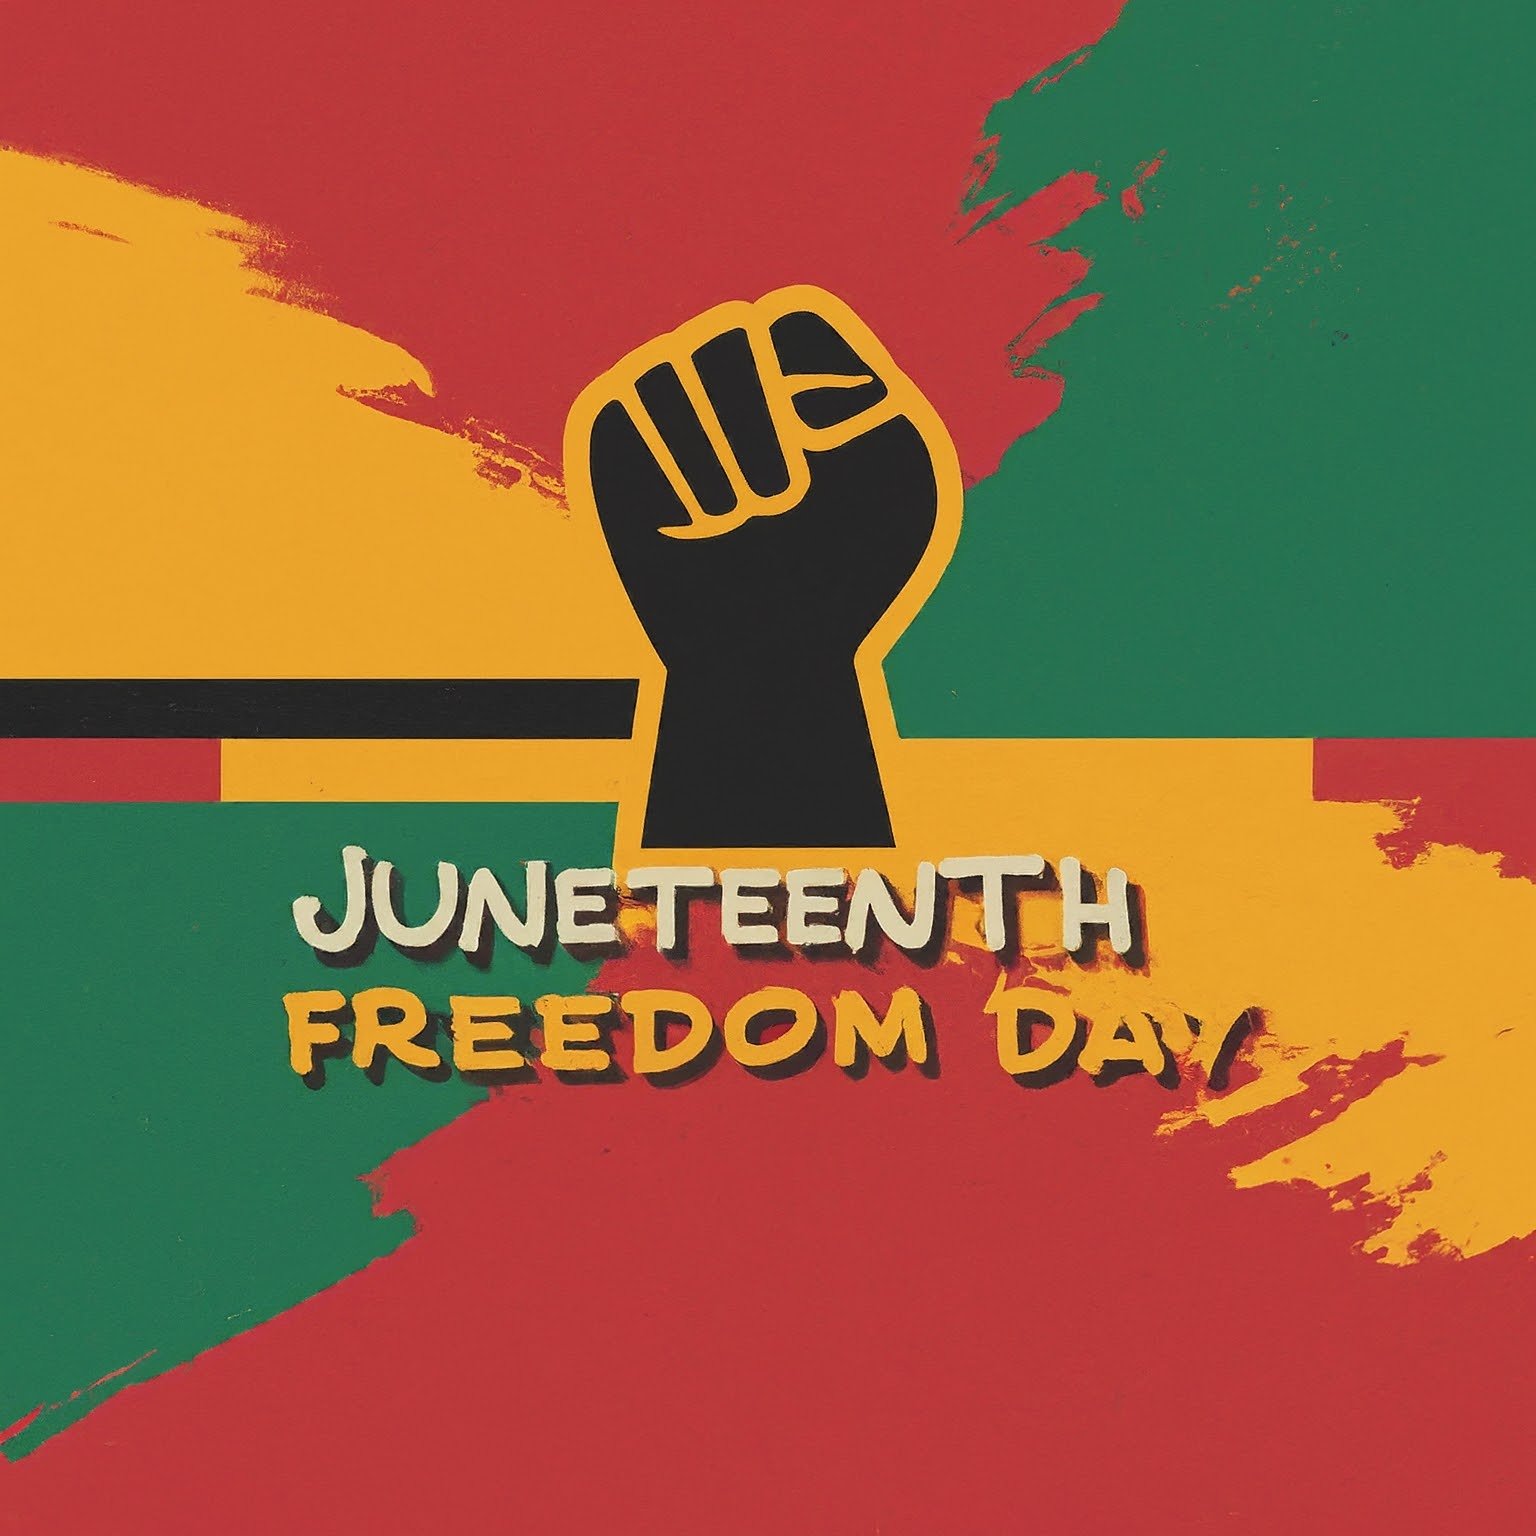 Orange 142 is Thrilled to Celebrate America's Newest National Holiday: Juneteenth!